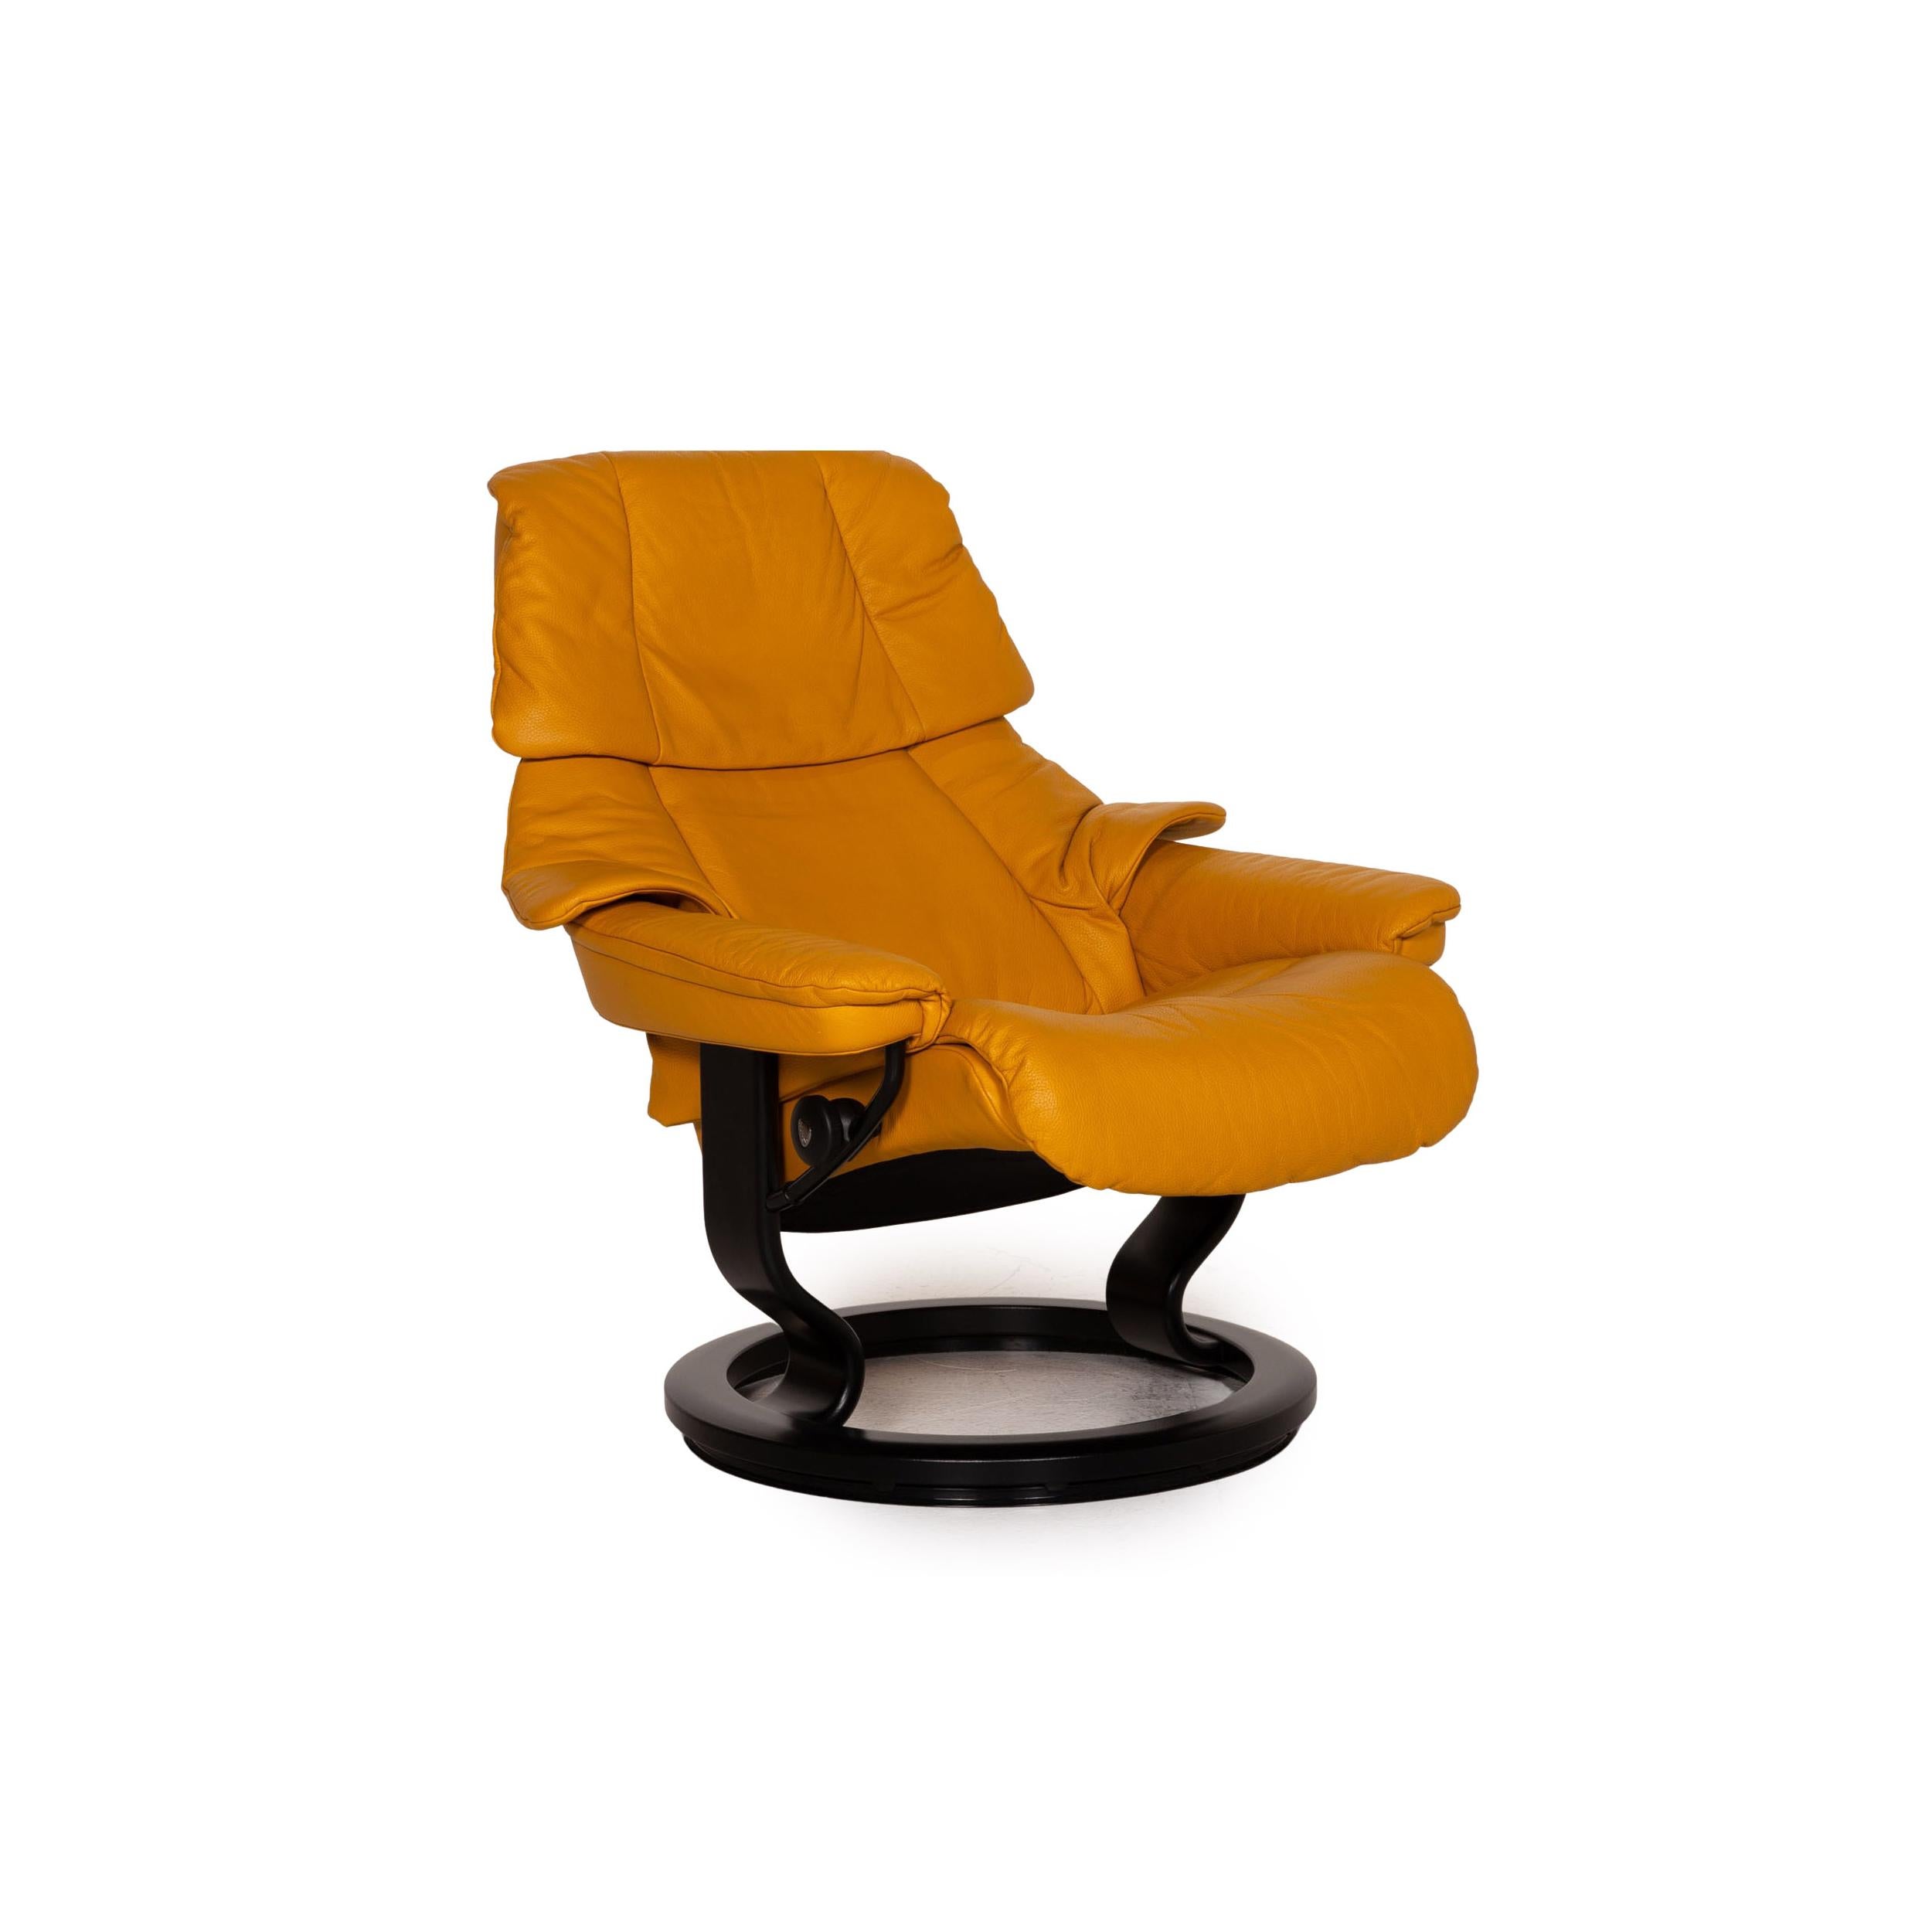 Contemporary Stressless Reno Leather Recliner Yellow Armchair